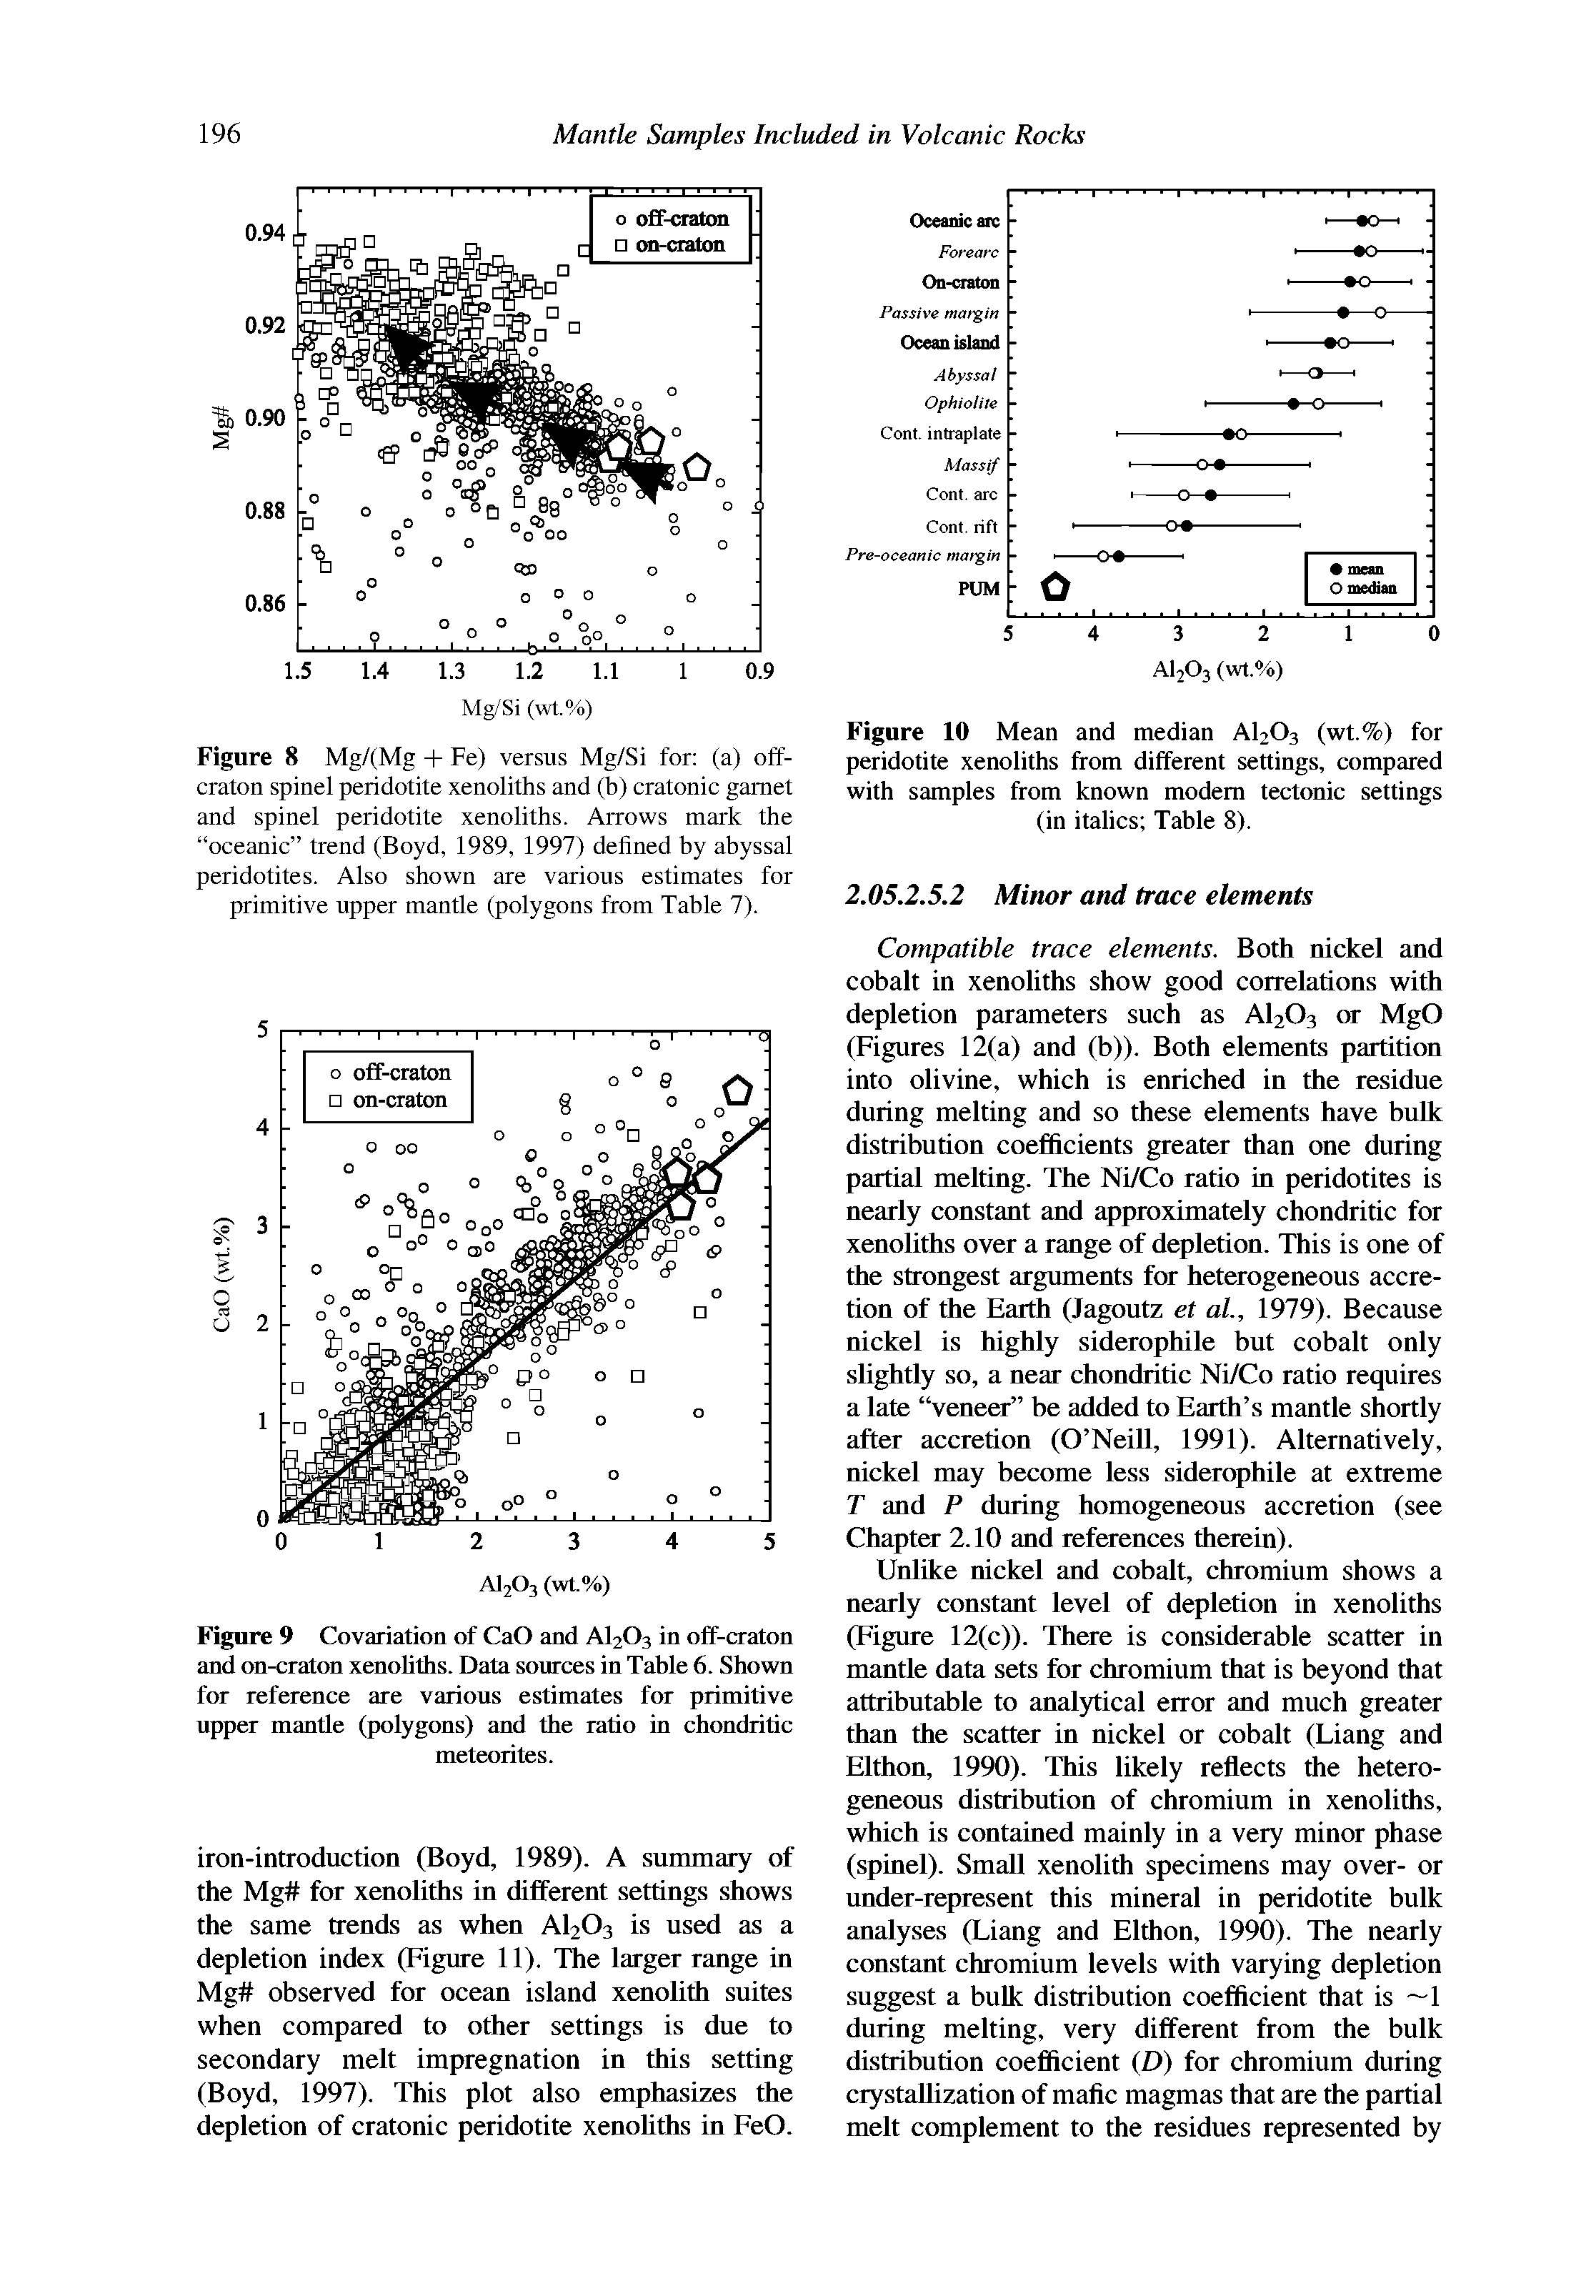 Figure 10 Mean and median AI2O3 (wt.%) for peridotite xenoliths from different settings, compared with samples from known modem tectonic settings (in italics Table 8).